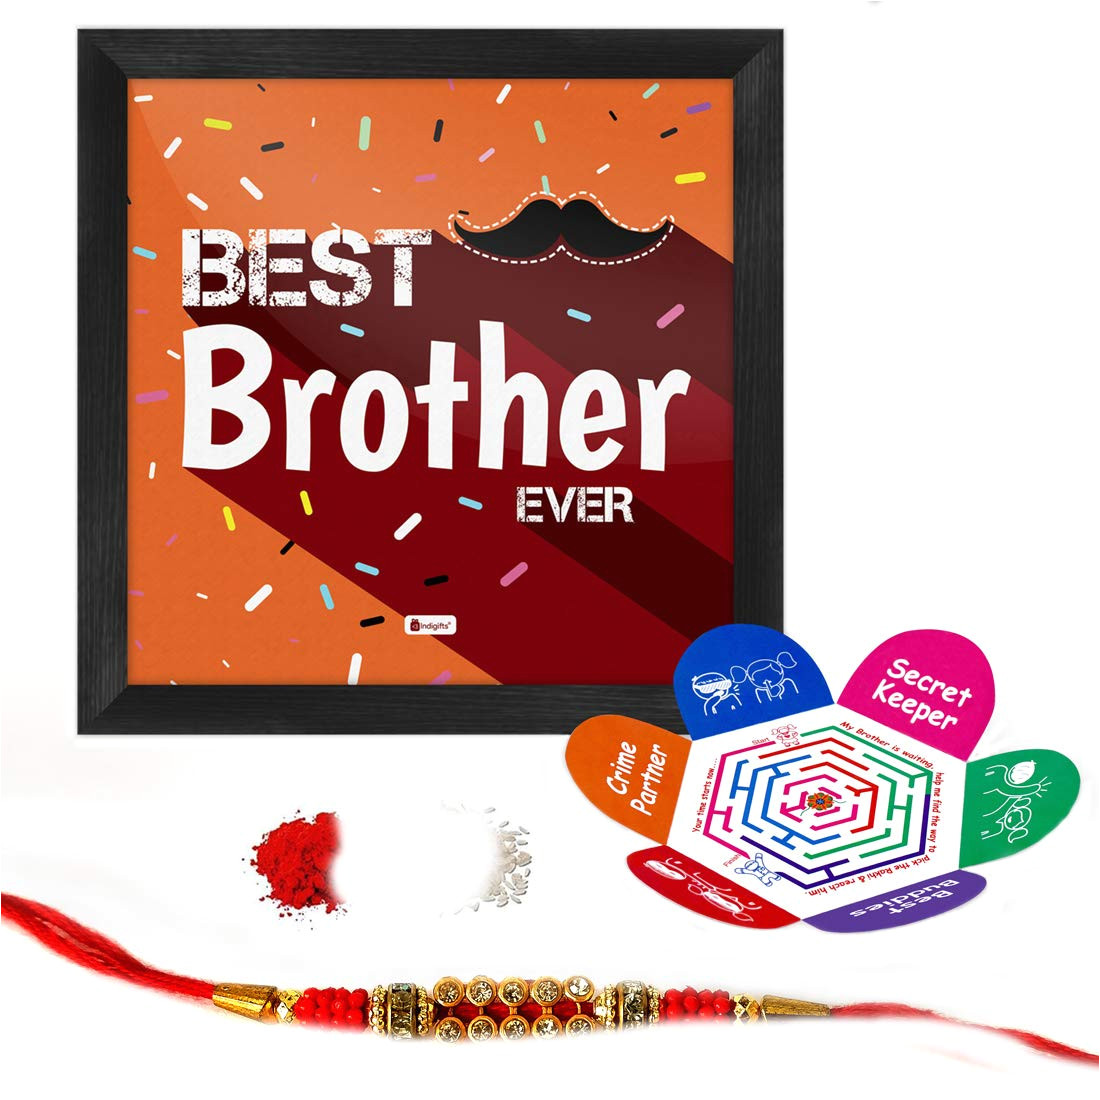 indigifts best brother ever quote printed gift set of poster frame 6x6 inches crystal rakhi roli chawal greeting card for men boys amazon in home